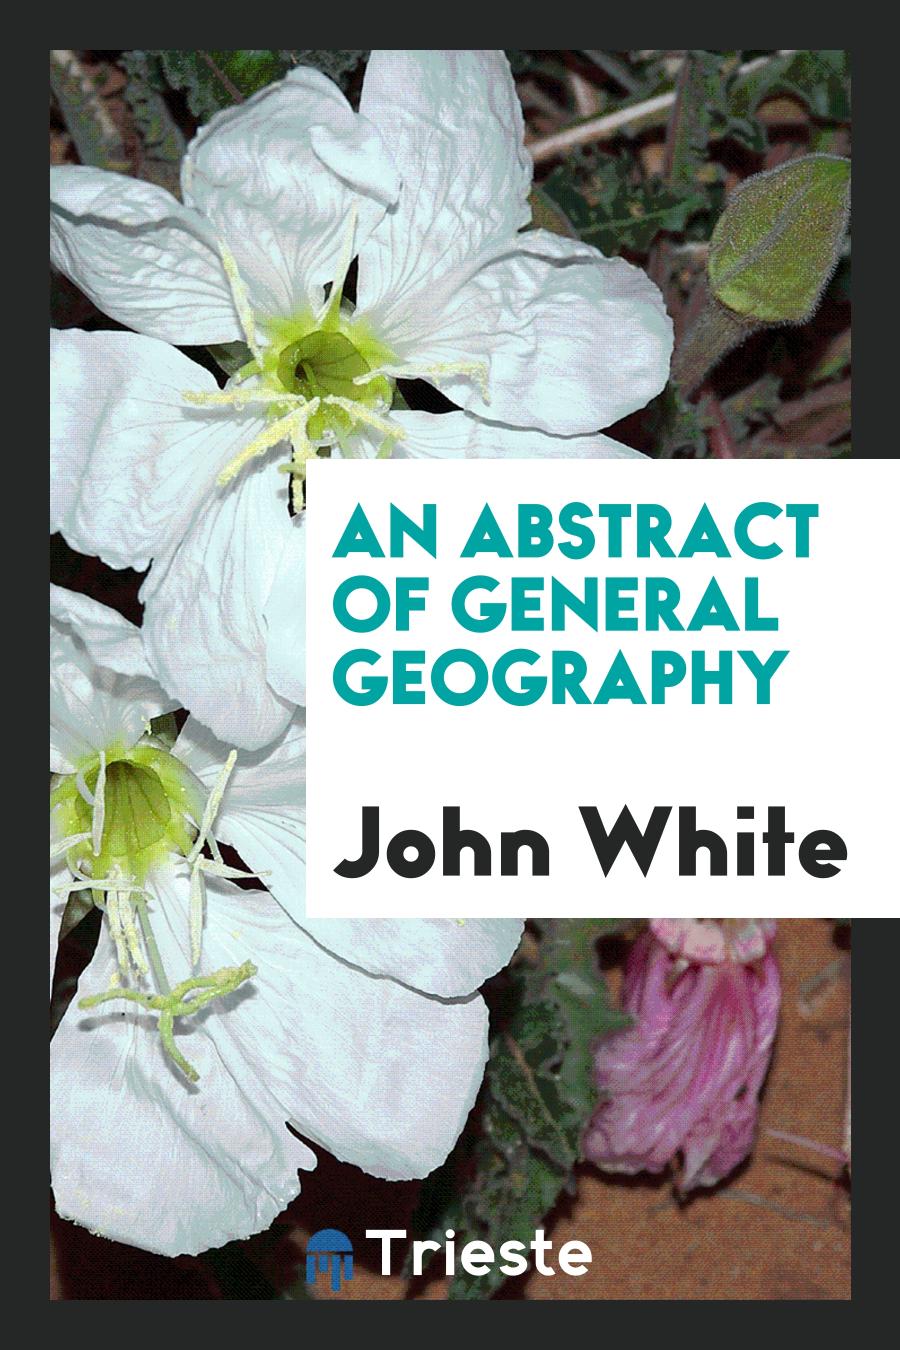 An abstract of general geography